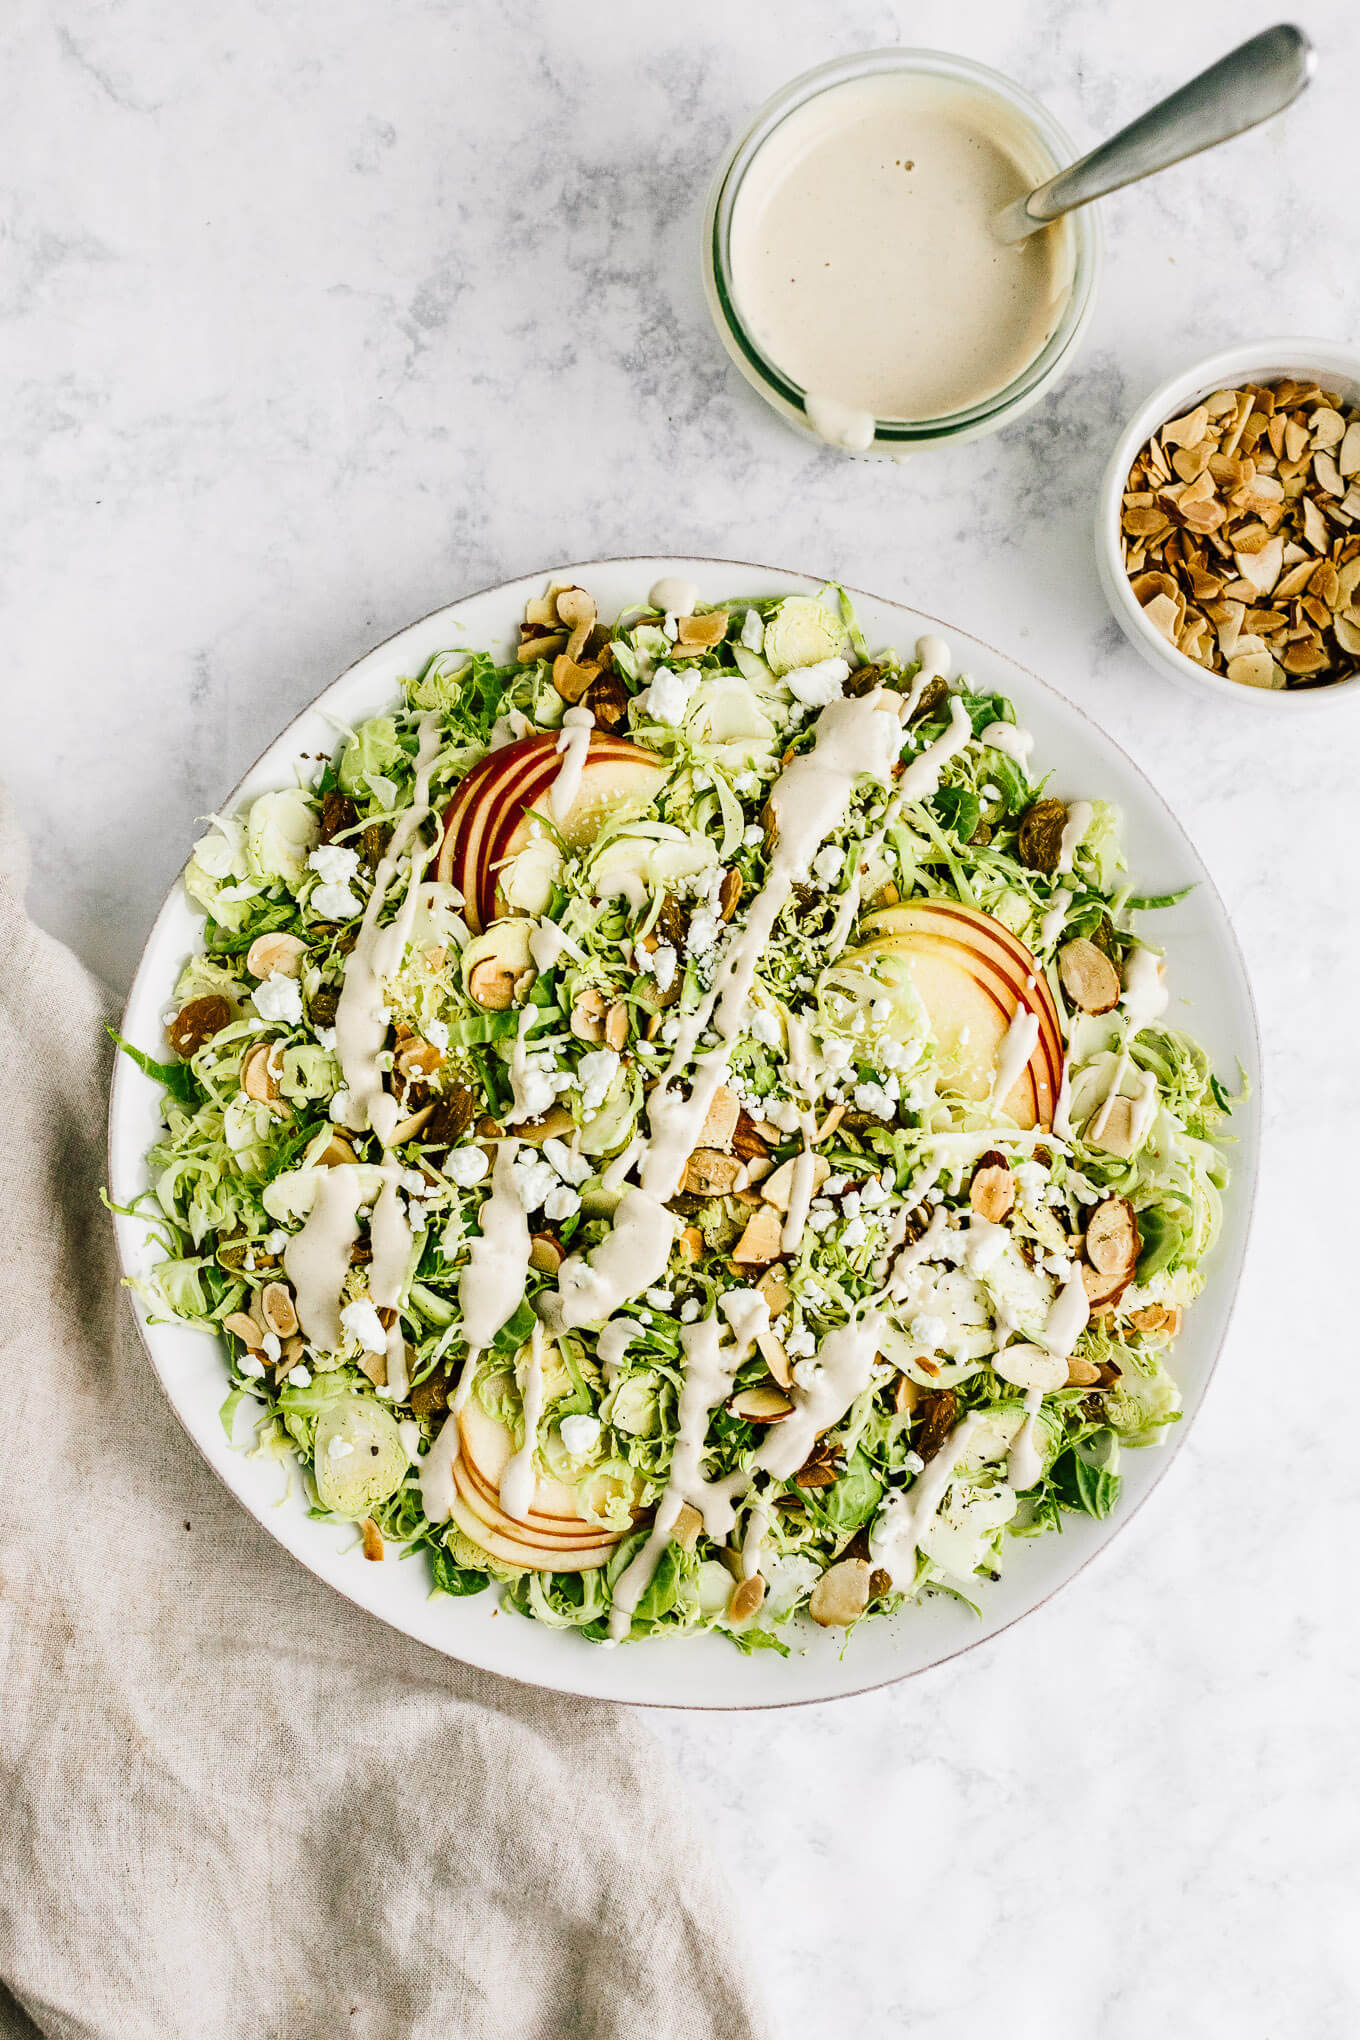 Shaved Brussels sprout and apples salad with maple tahini dressing